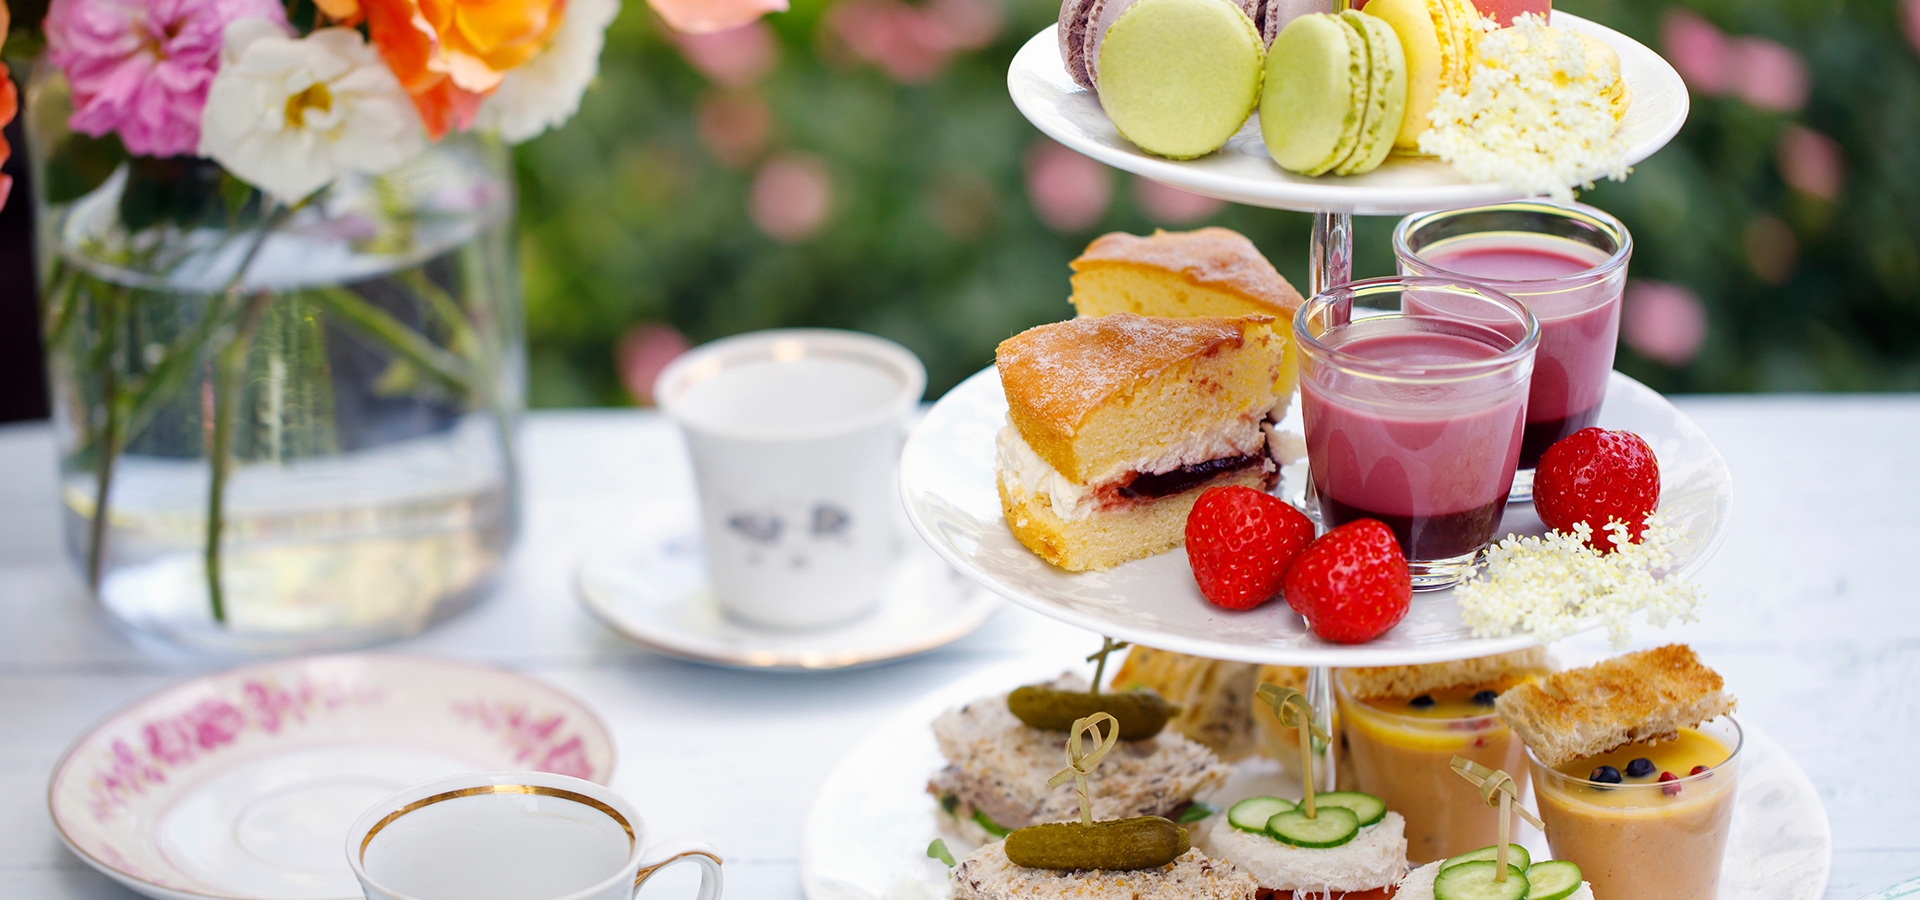 Monthly Afternoon Tea - Tuesday 17th May | Cambridge Cancer Help Centre